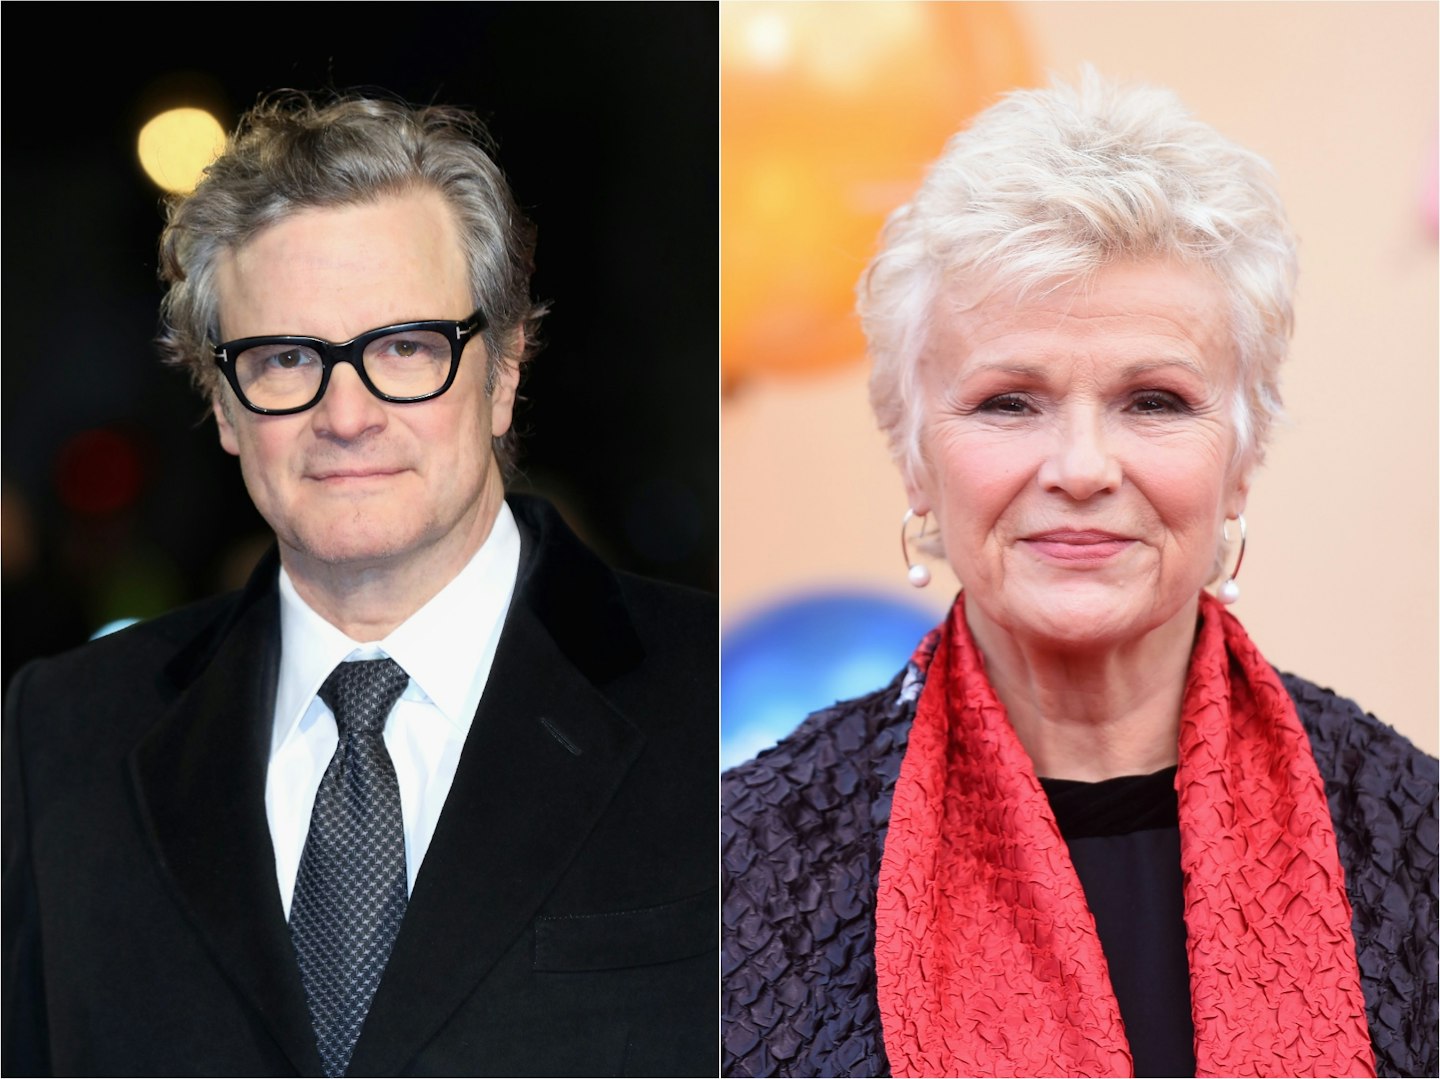 Colin Firth and Julie Walters